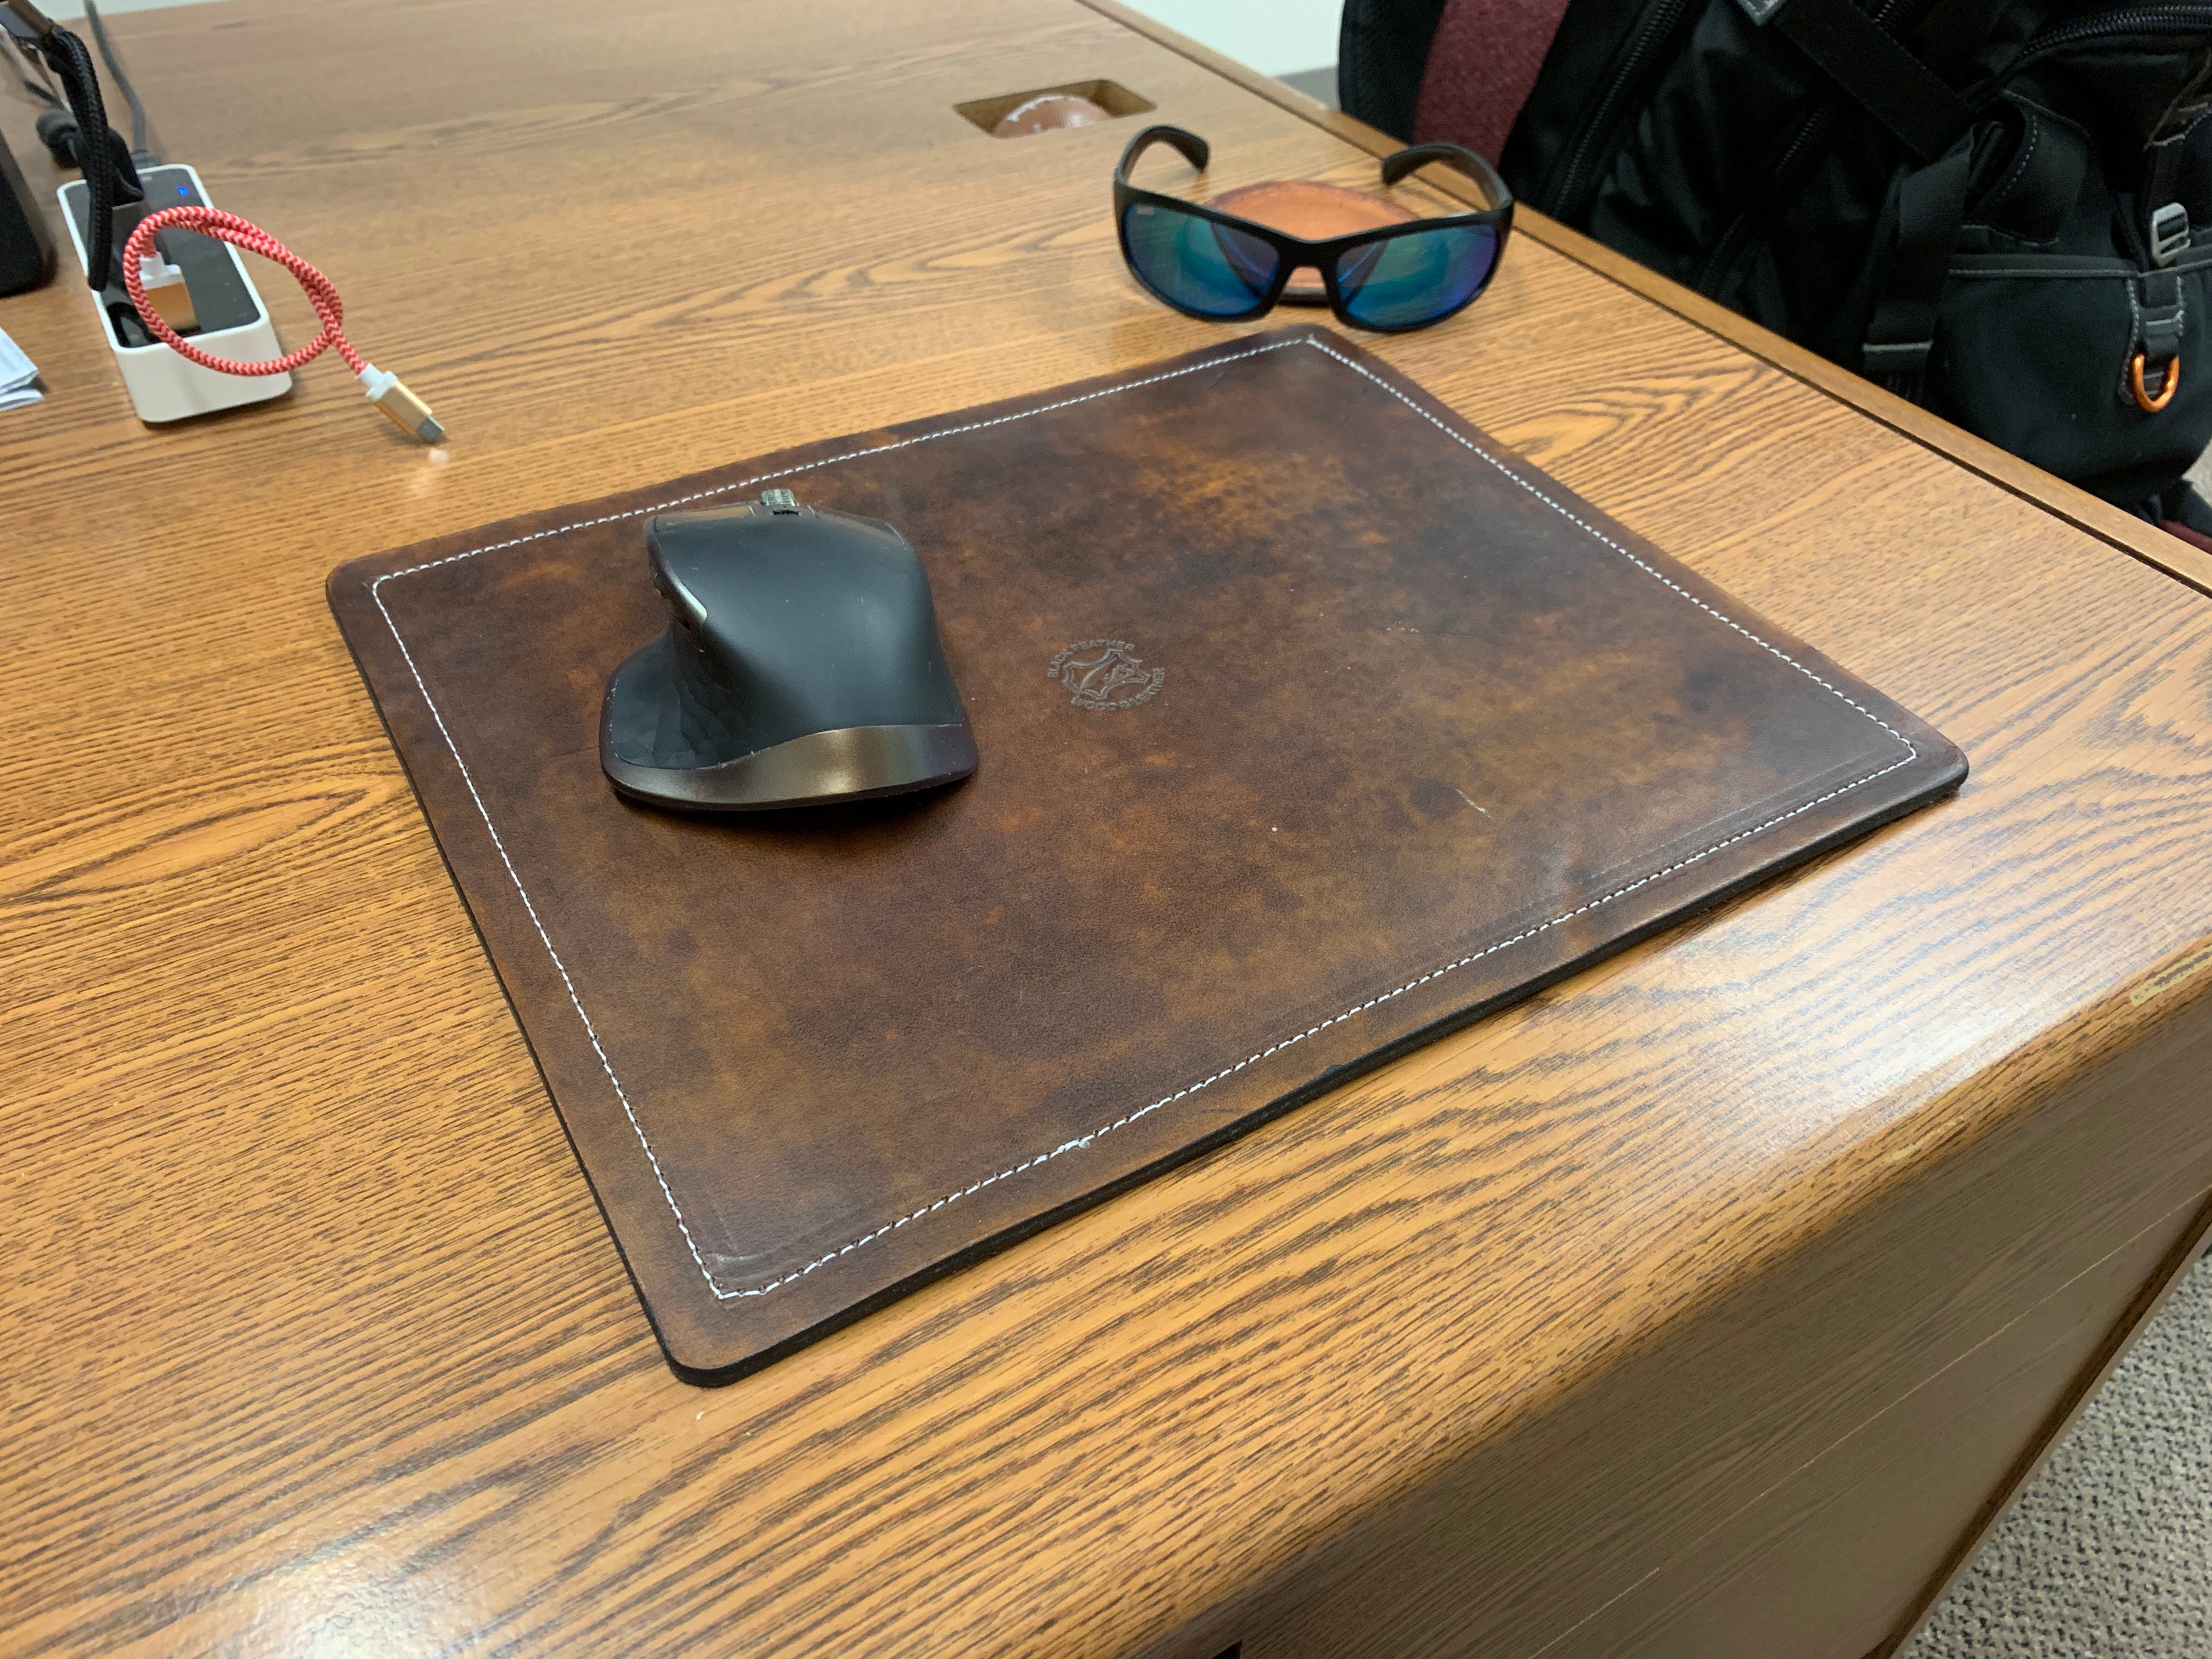 The Ultimate Leather Mouse Pad